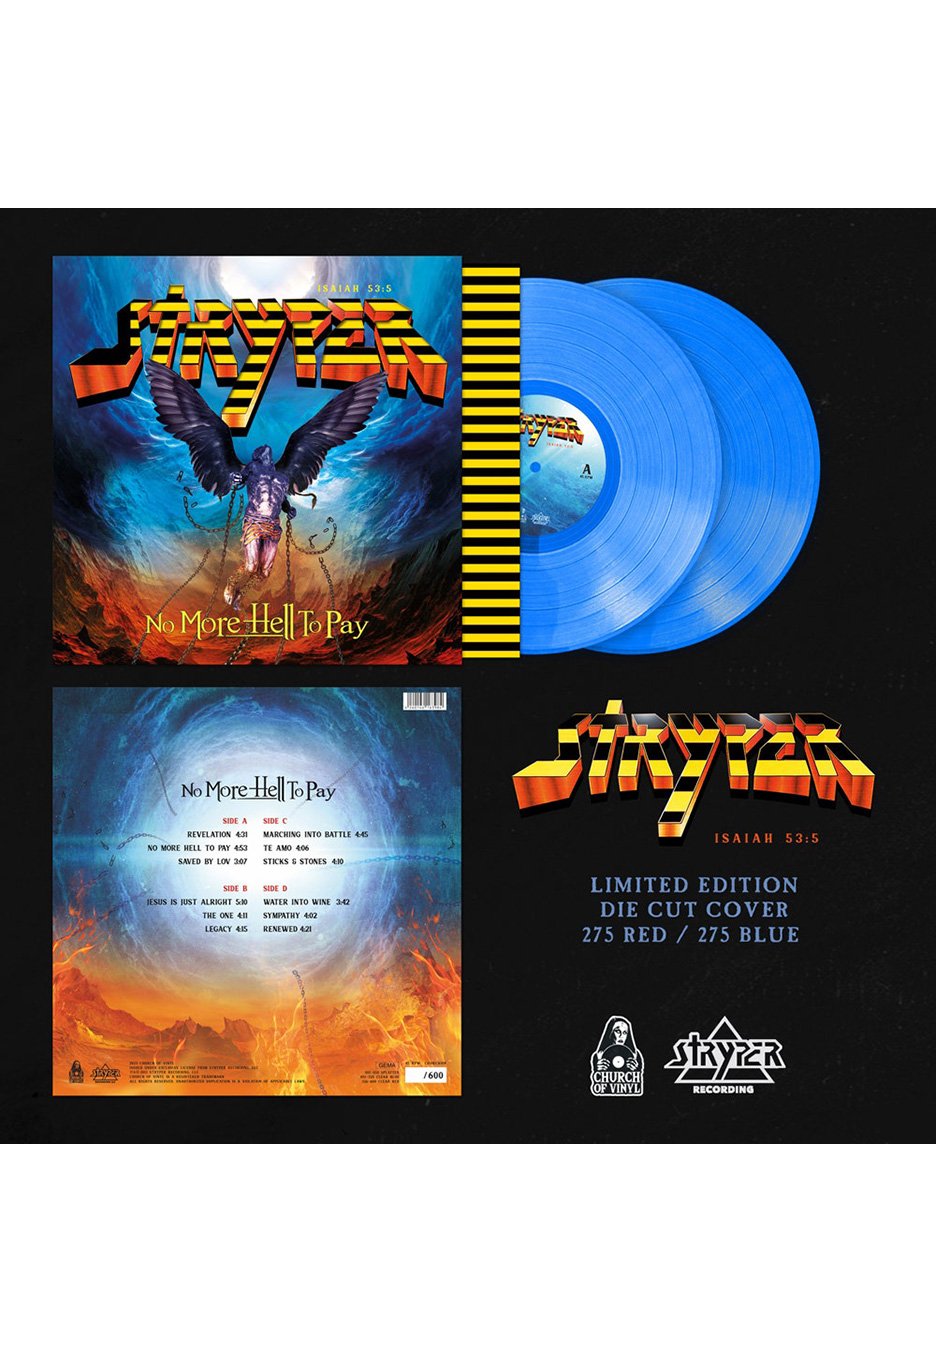 Stryper - No More Hell To Pay Clear Blue - Colored 2 Vinyl